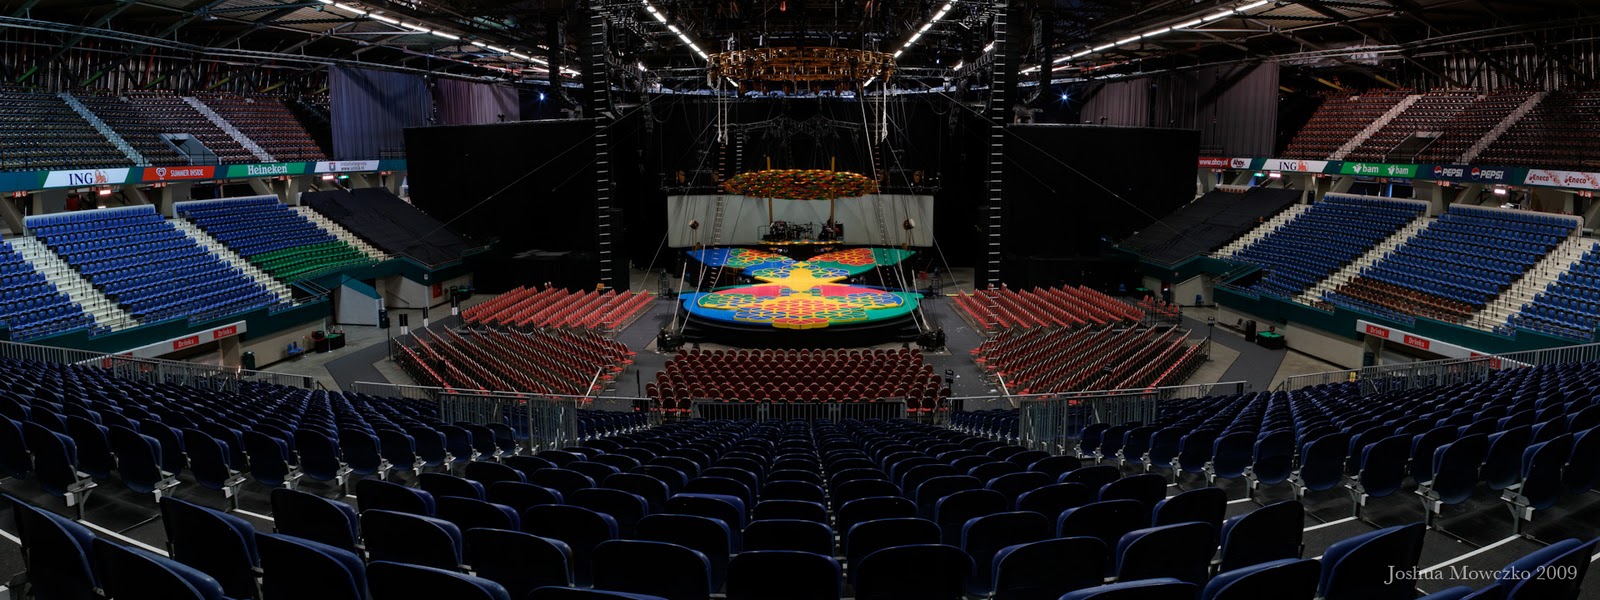 Life in the Circus: Ahoy Arena: Rotterdam, Netherlands